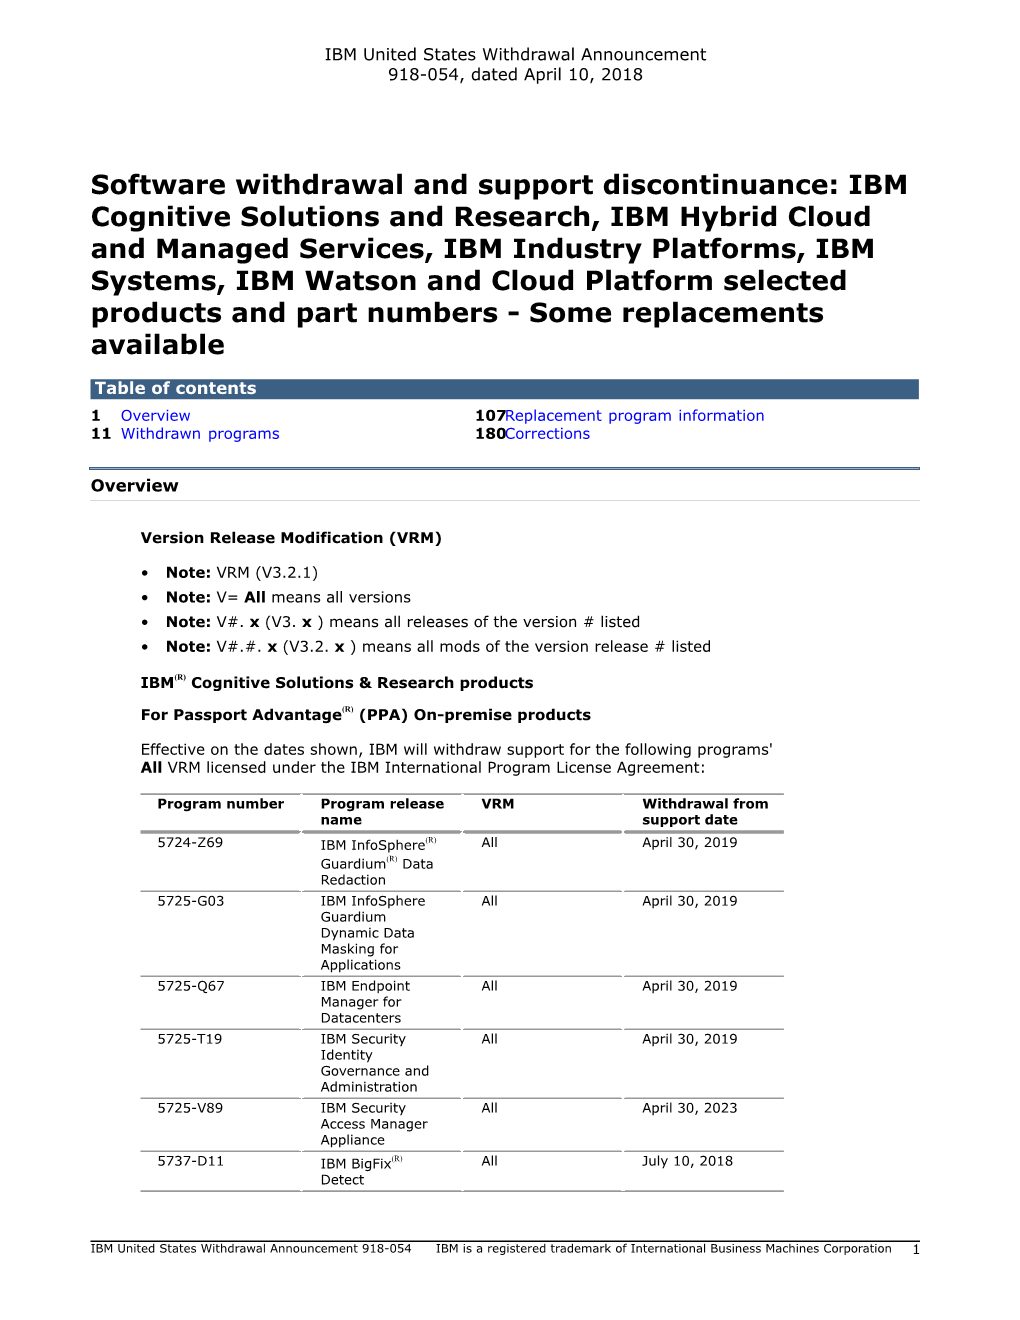 Software Withdrawal and Support Discontinuance: IBM Cognitive